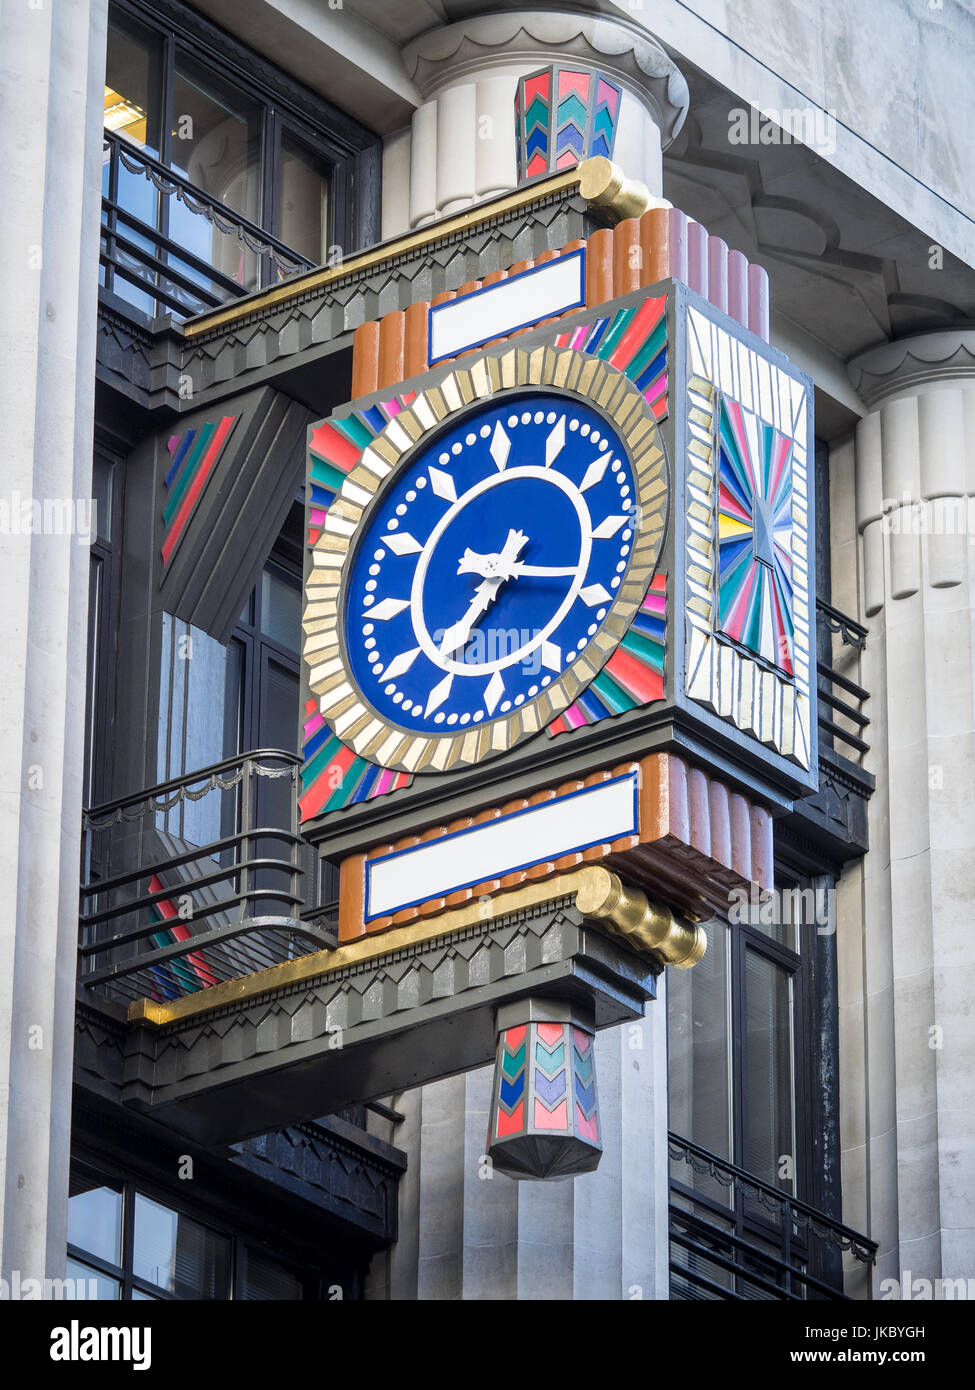 Ornate Art Deco Clock on the former Daily Telegraph Building in Fleet Street, London. The Building (now Peterborough Court) houses Goldman Sachs Stock Photo